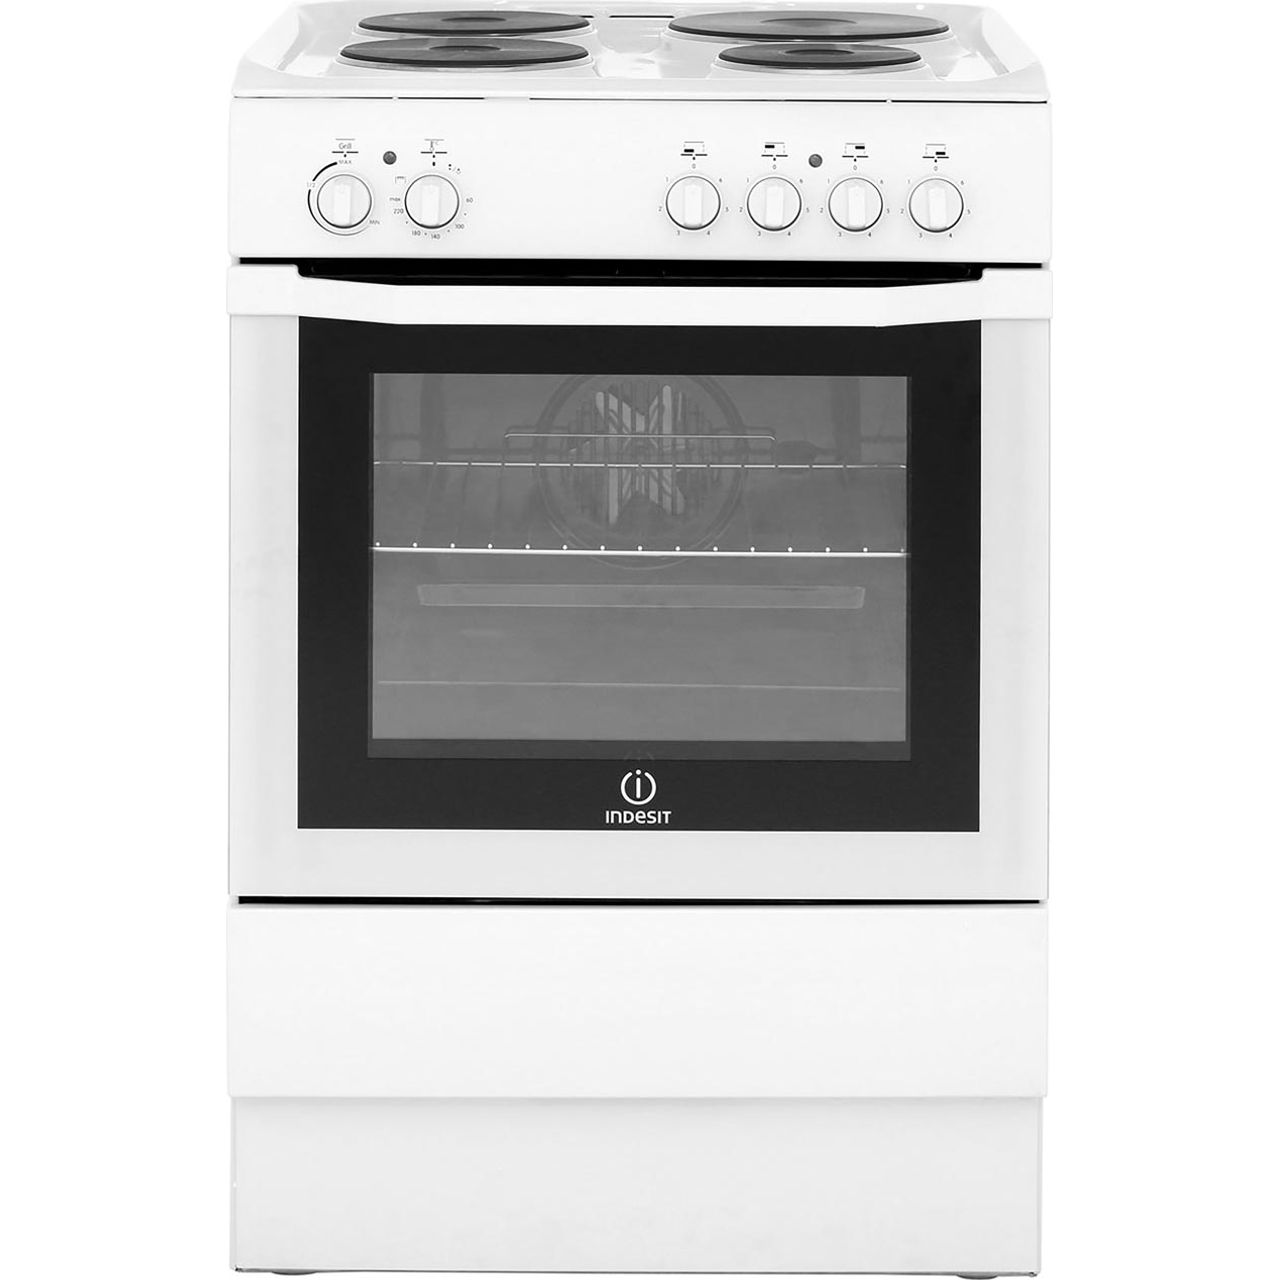 Indesit I6EVAW 60cm Electric Cooker with Solid Plate Hob Review